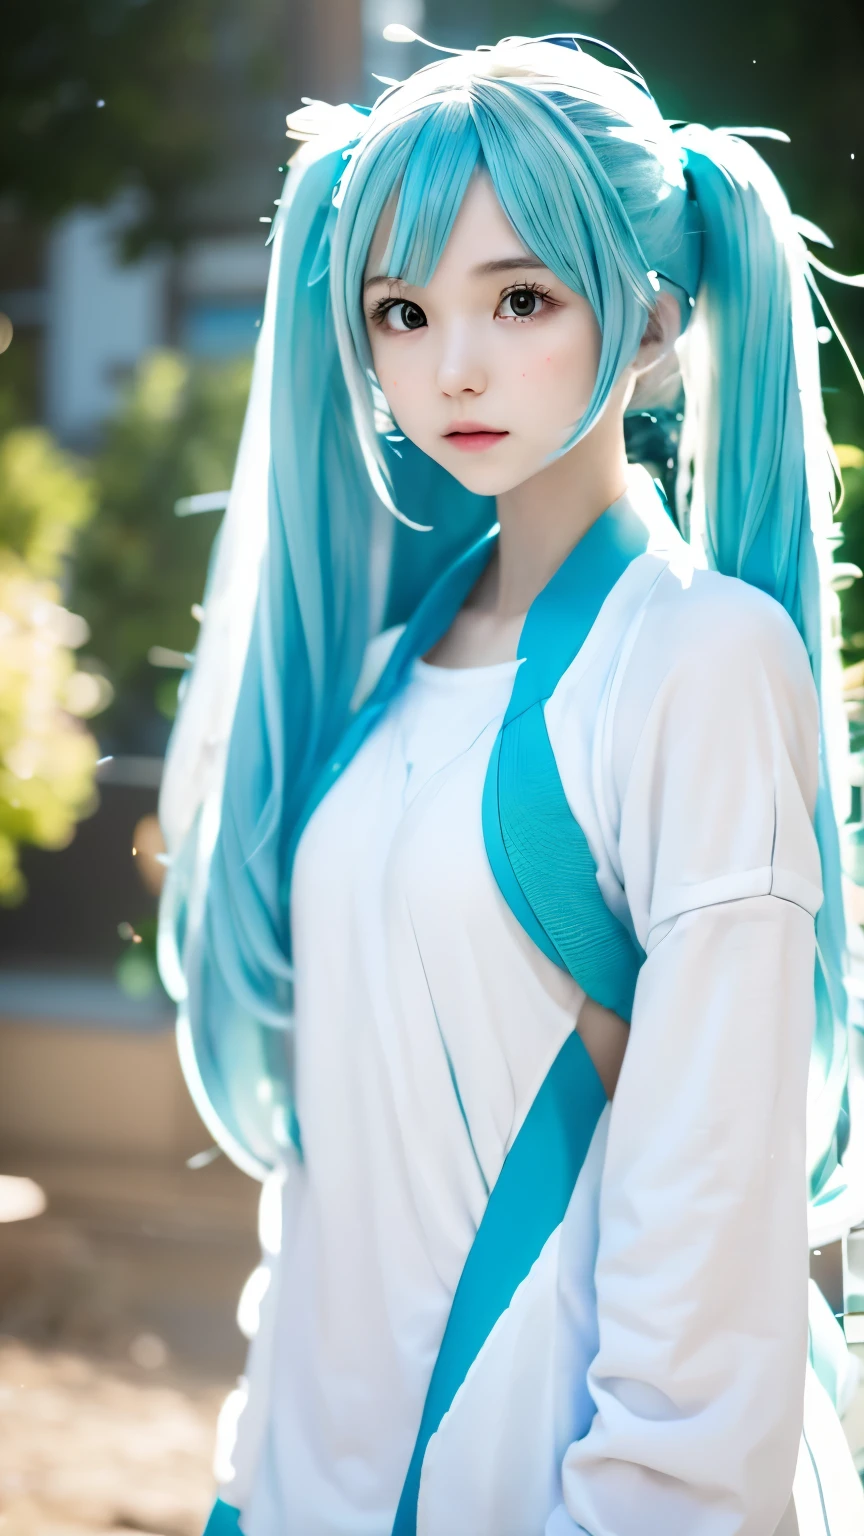 one girl、hatsune miku cosplay、anatomy、Correct depiction of the human body、Upper body angle、、１４talent、beautiful white skin、cute face、small nose、plump lips、small orange eyeeticulously drawn face、highly detailed skin、natural skin texture、Your fingers are clean and delicate.、small breasts、small breasts、An ennui look、detailed face、Dirty hair、Standing、Random attire、Random colored shirts、perfectly blurred background、